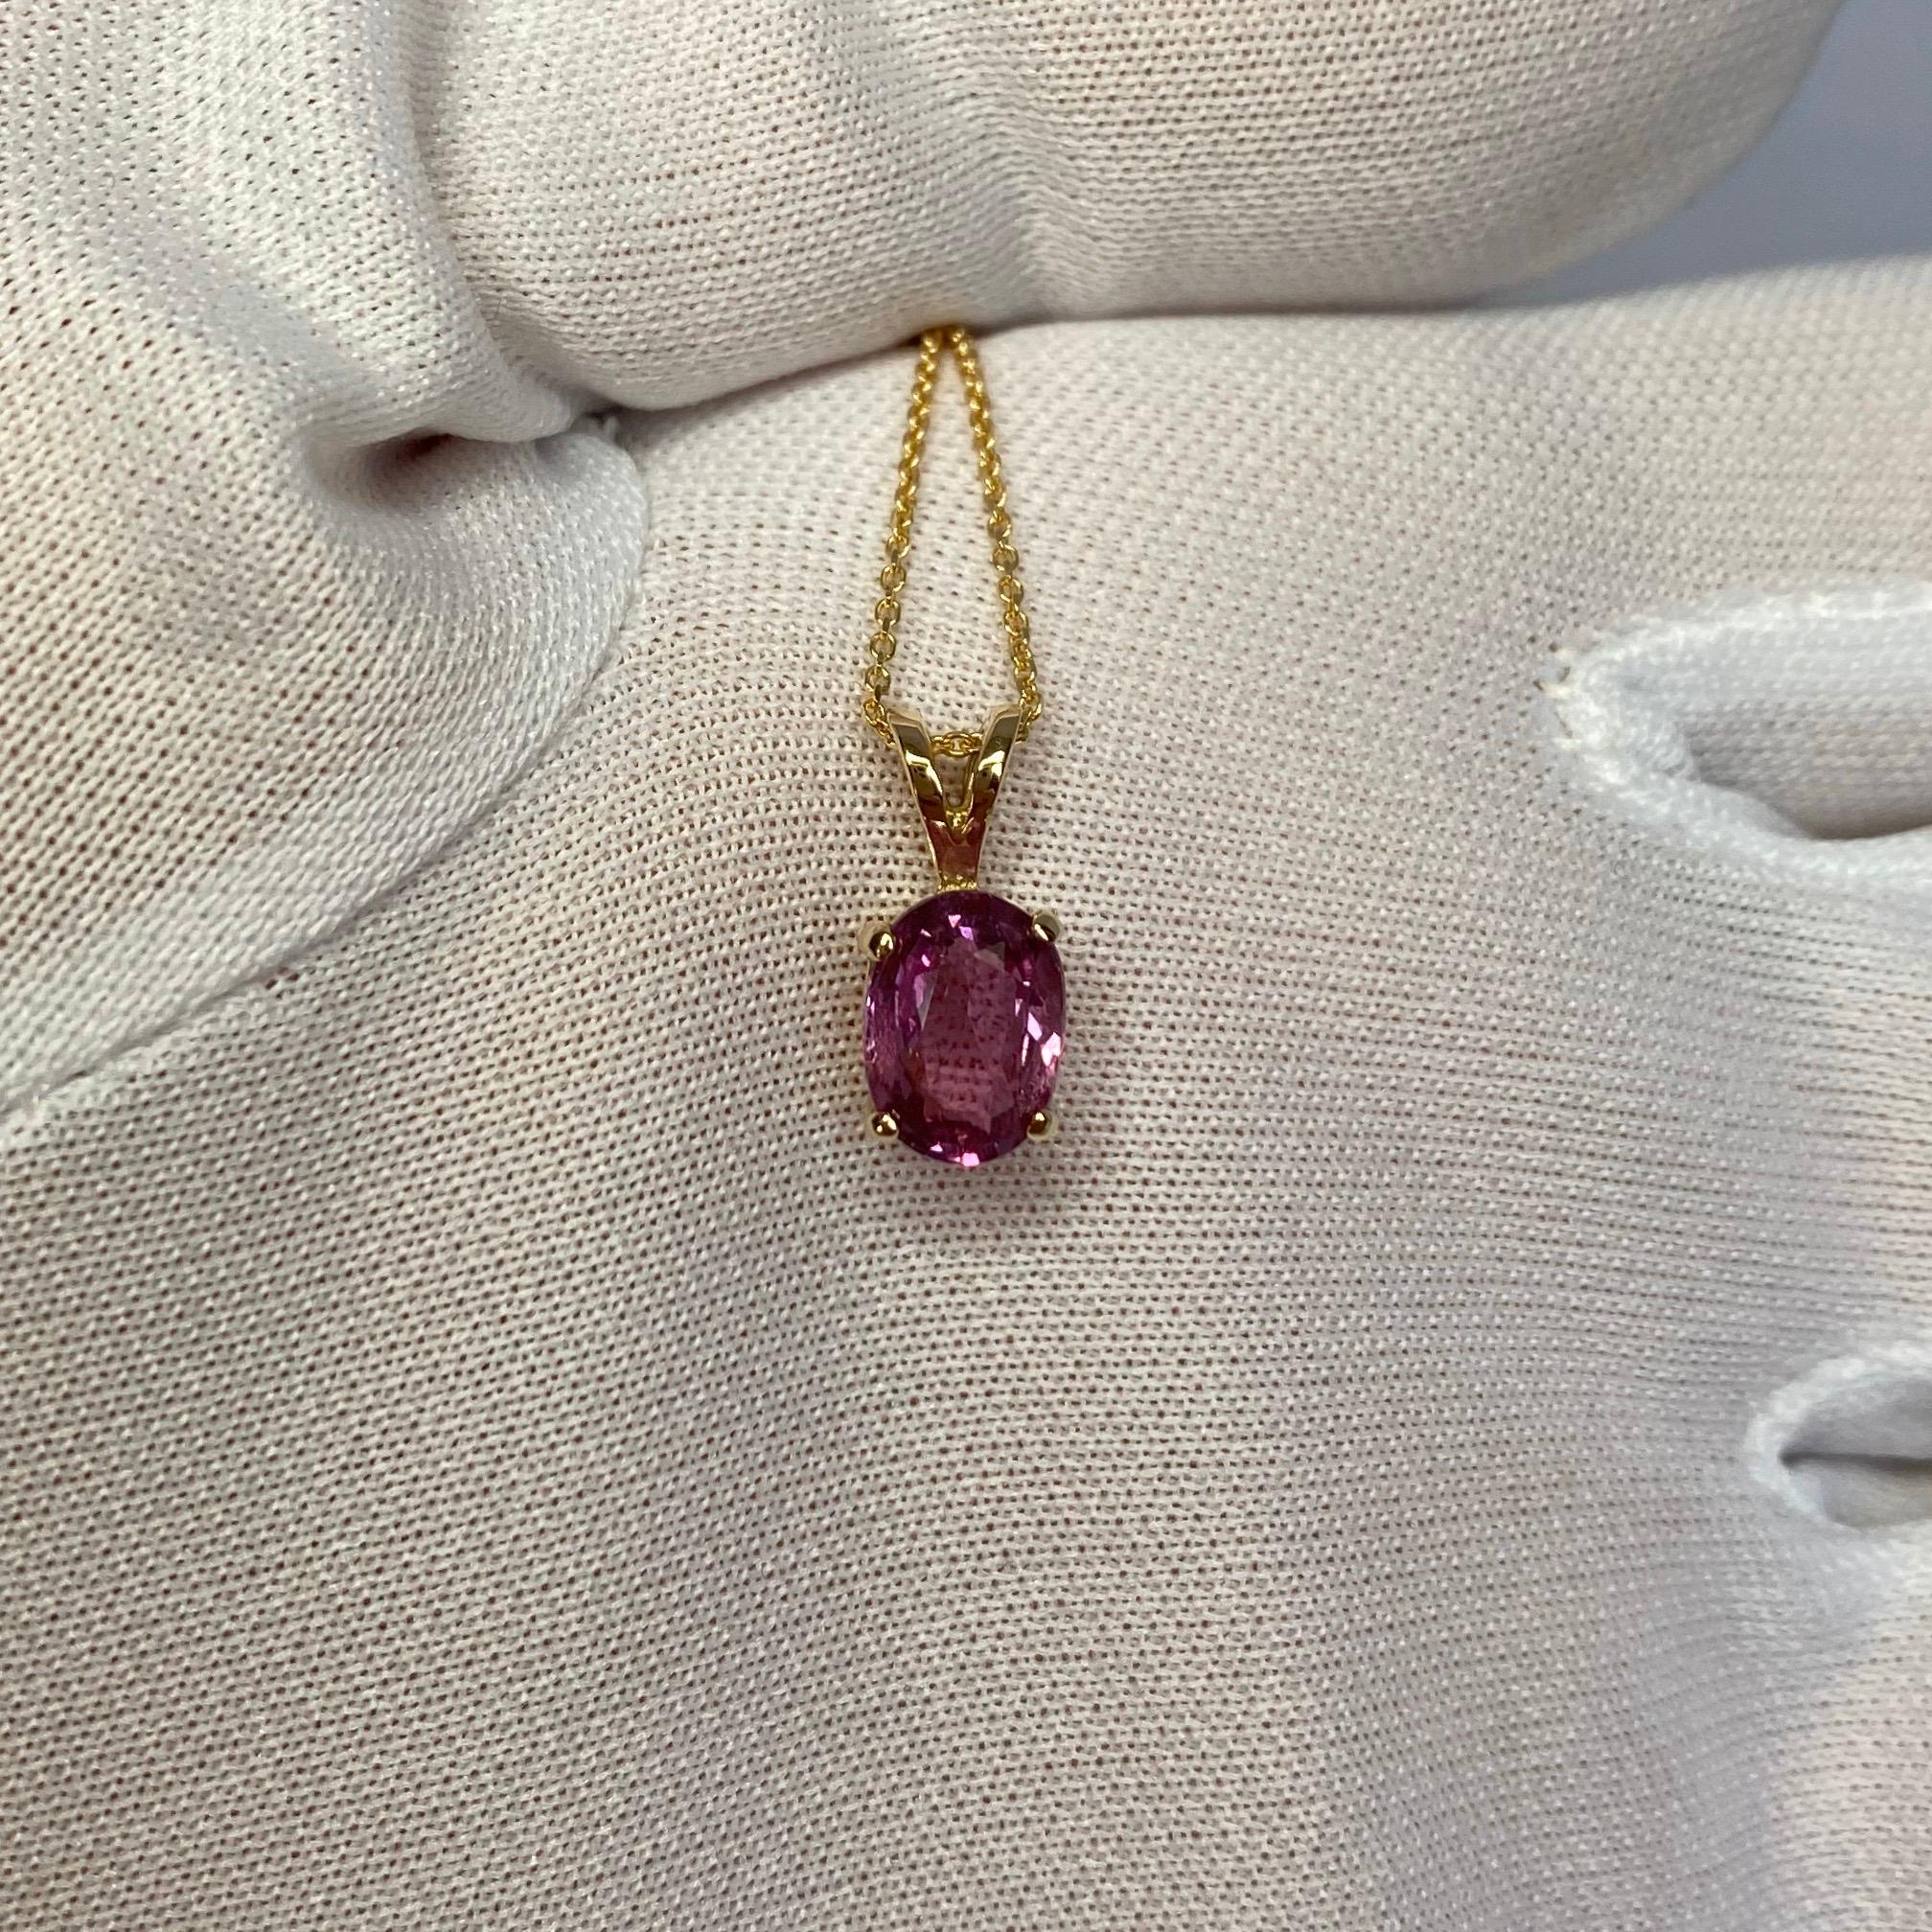 IGI Certified Untreated 1.61ct Pink Purple Sapphire Solitaire Pendant Necklace 5